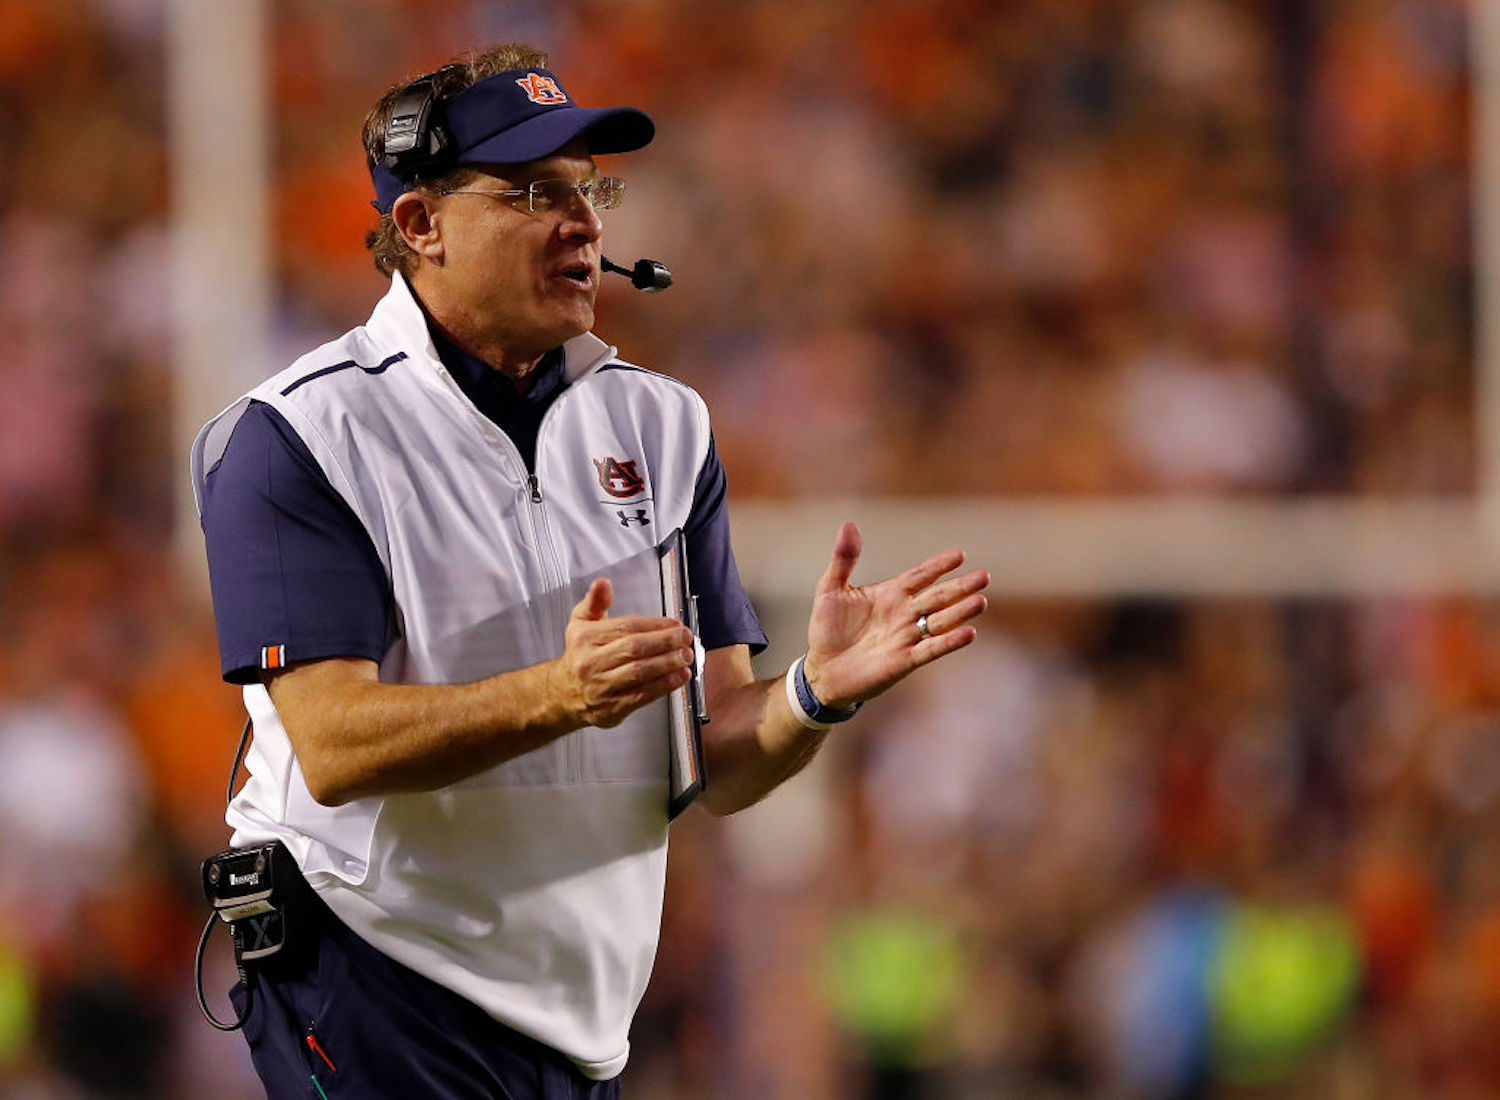 Gus Malzahn was fired this week after eight years at Auburn, but it's not all bad for the head coach. Malzahn actually made $21.45 million from a buyout.